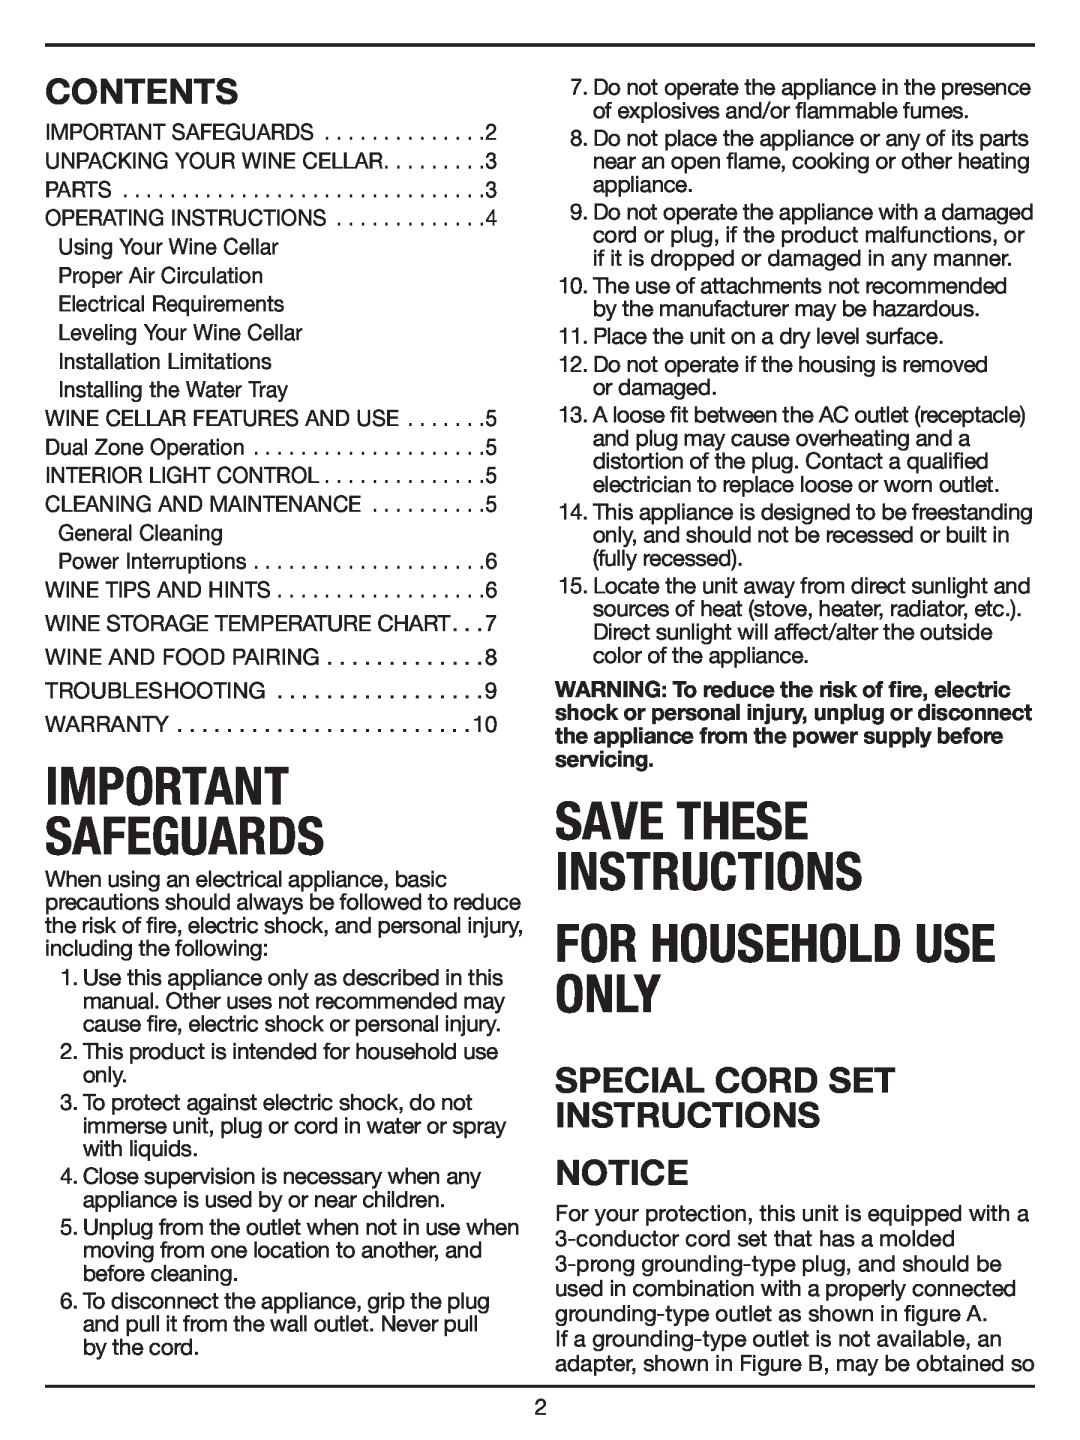 Cuisinart CWC-1200DZ Contents, Special Cord Set Instructions, Safeguards, For Household Use Only, Save These Instructions 